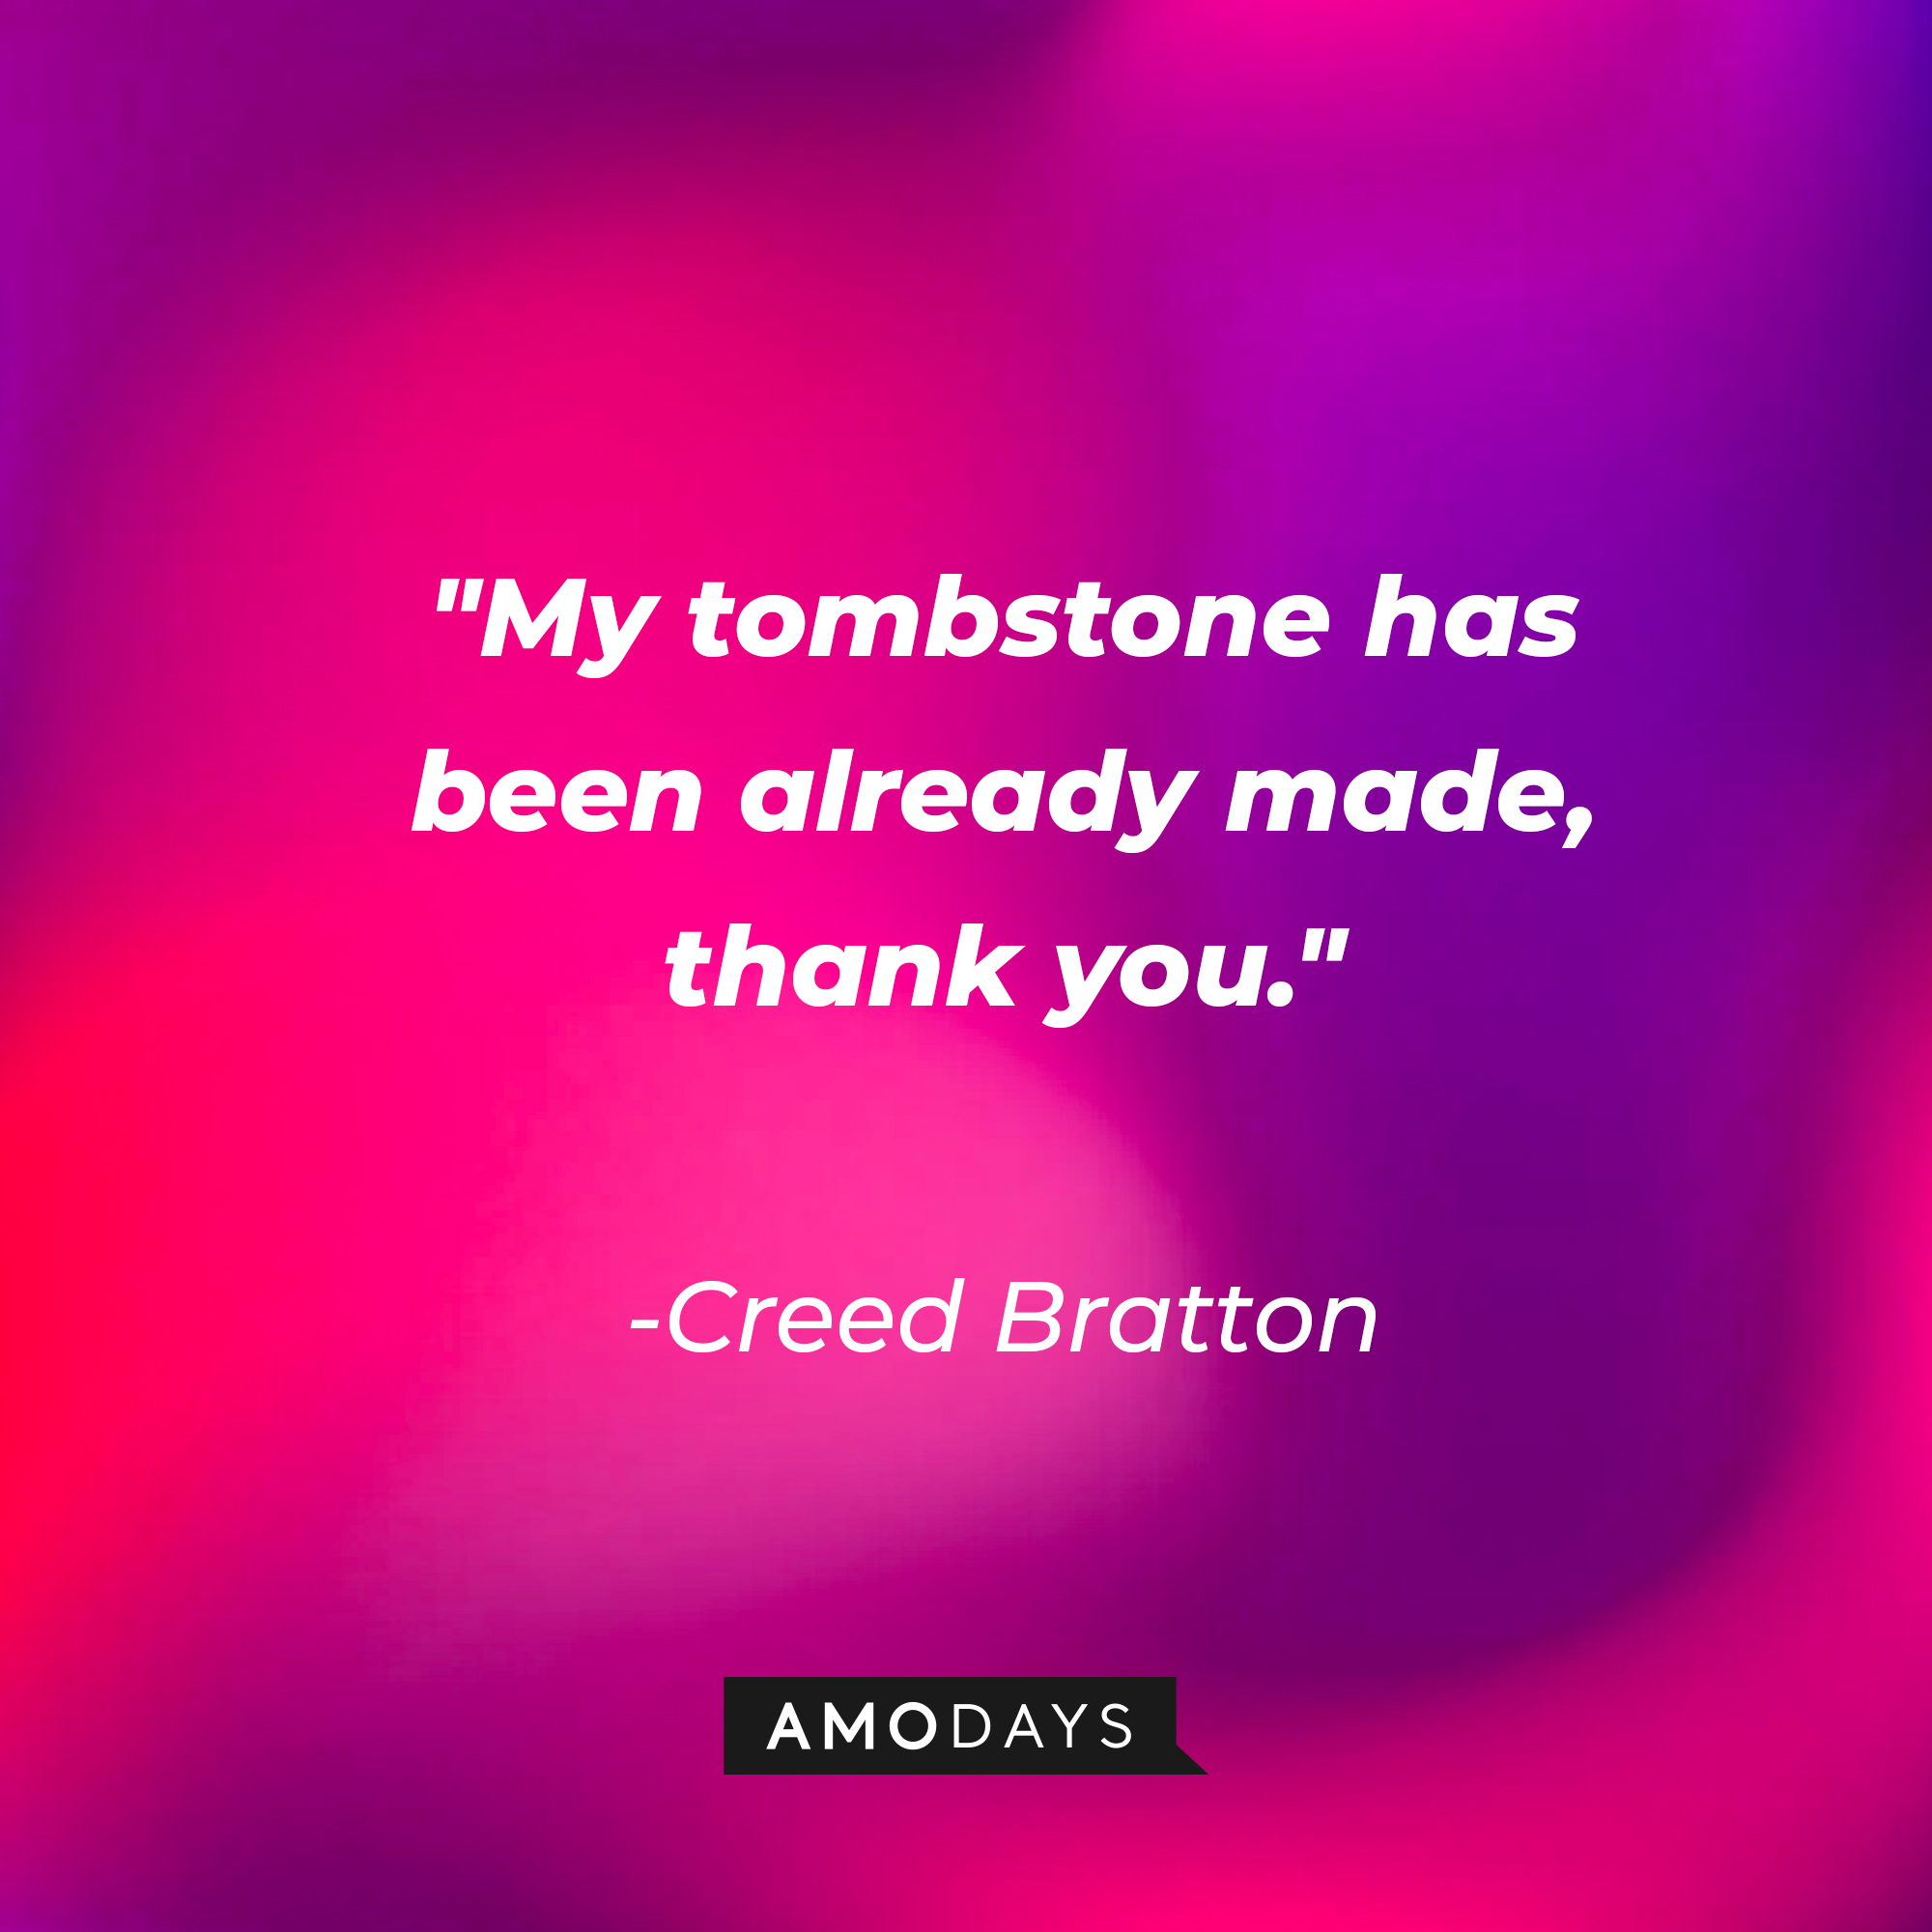 Creed Bratton's quote: "My tombstone has been already made, thank you." | Source: AmoDays